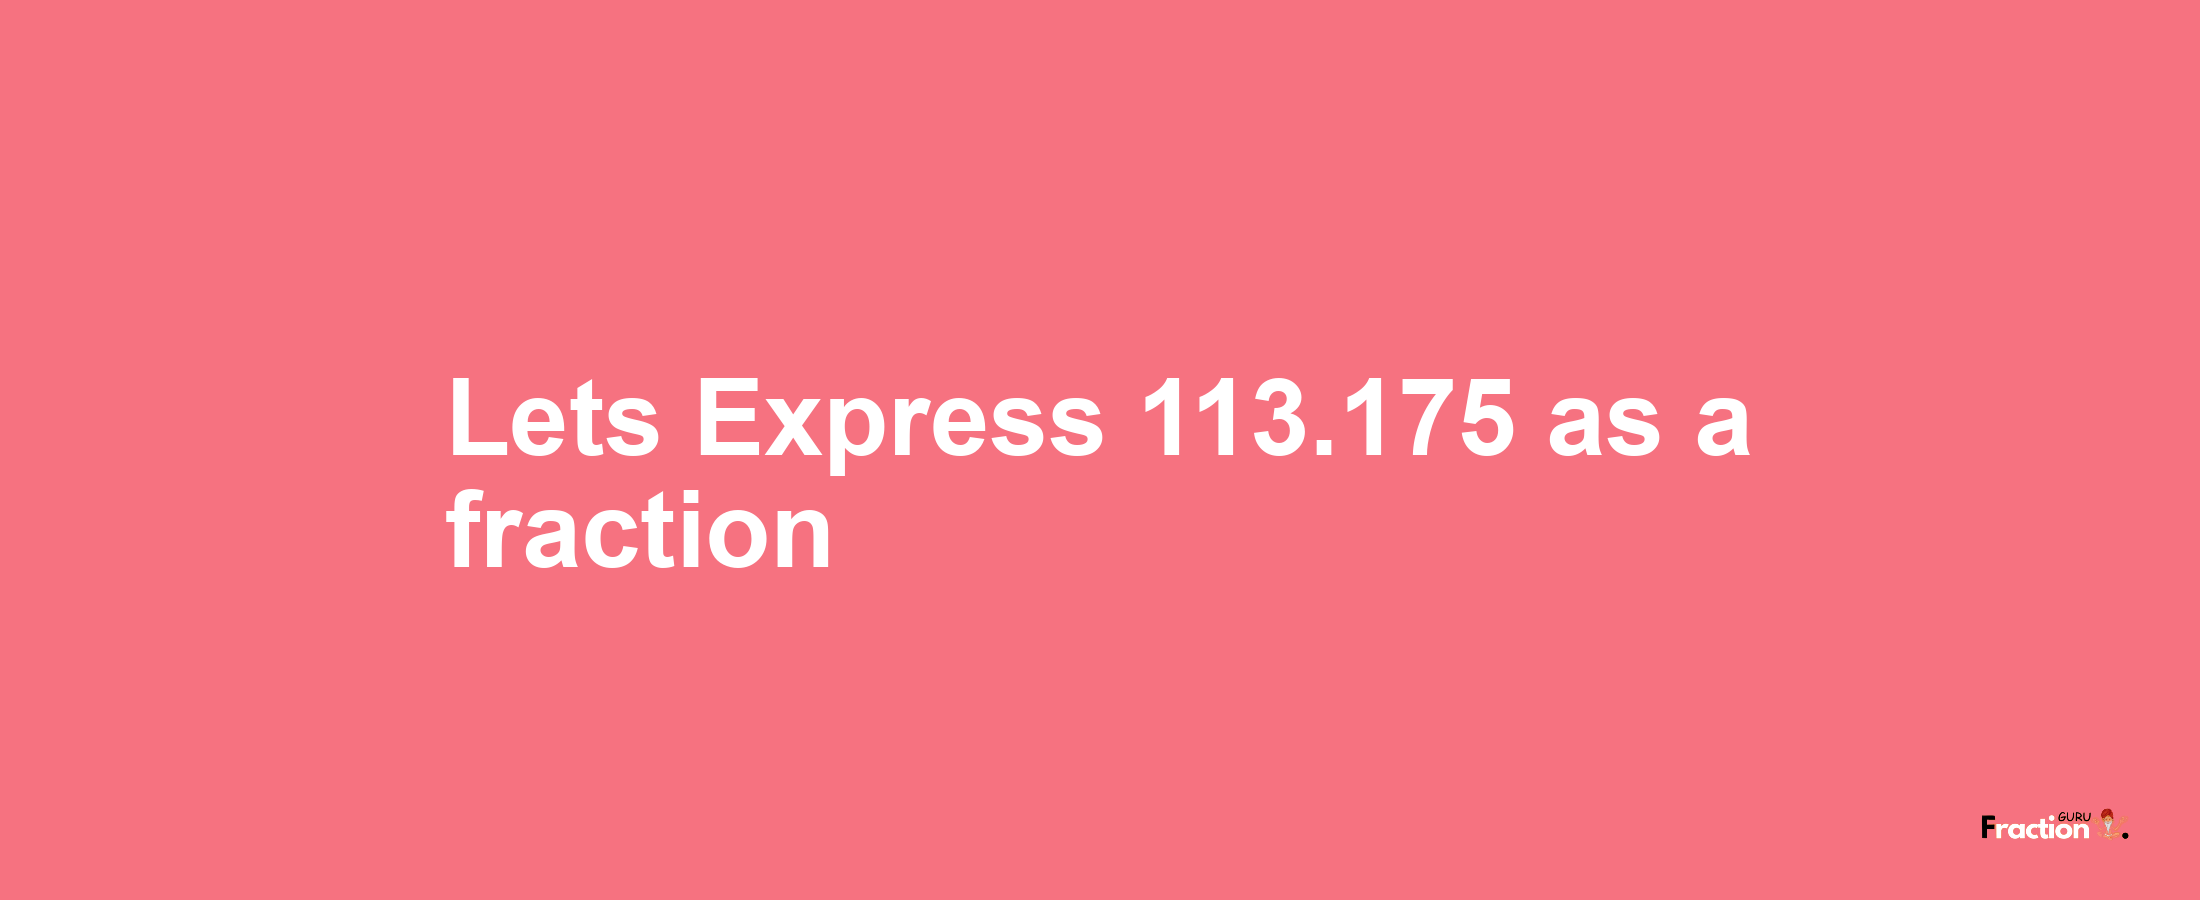 Lets Express 113.175 as afraction